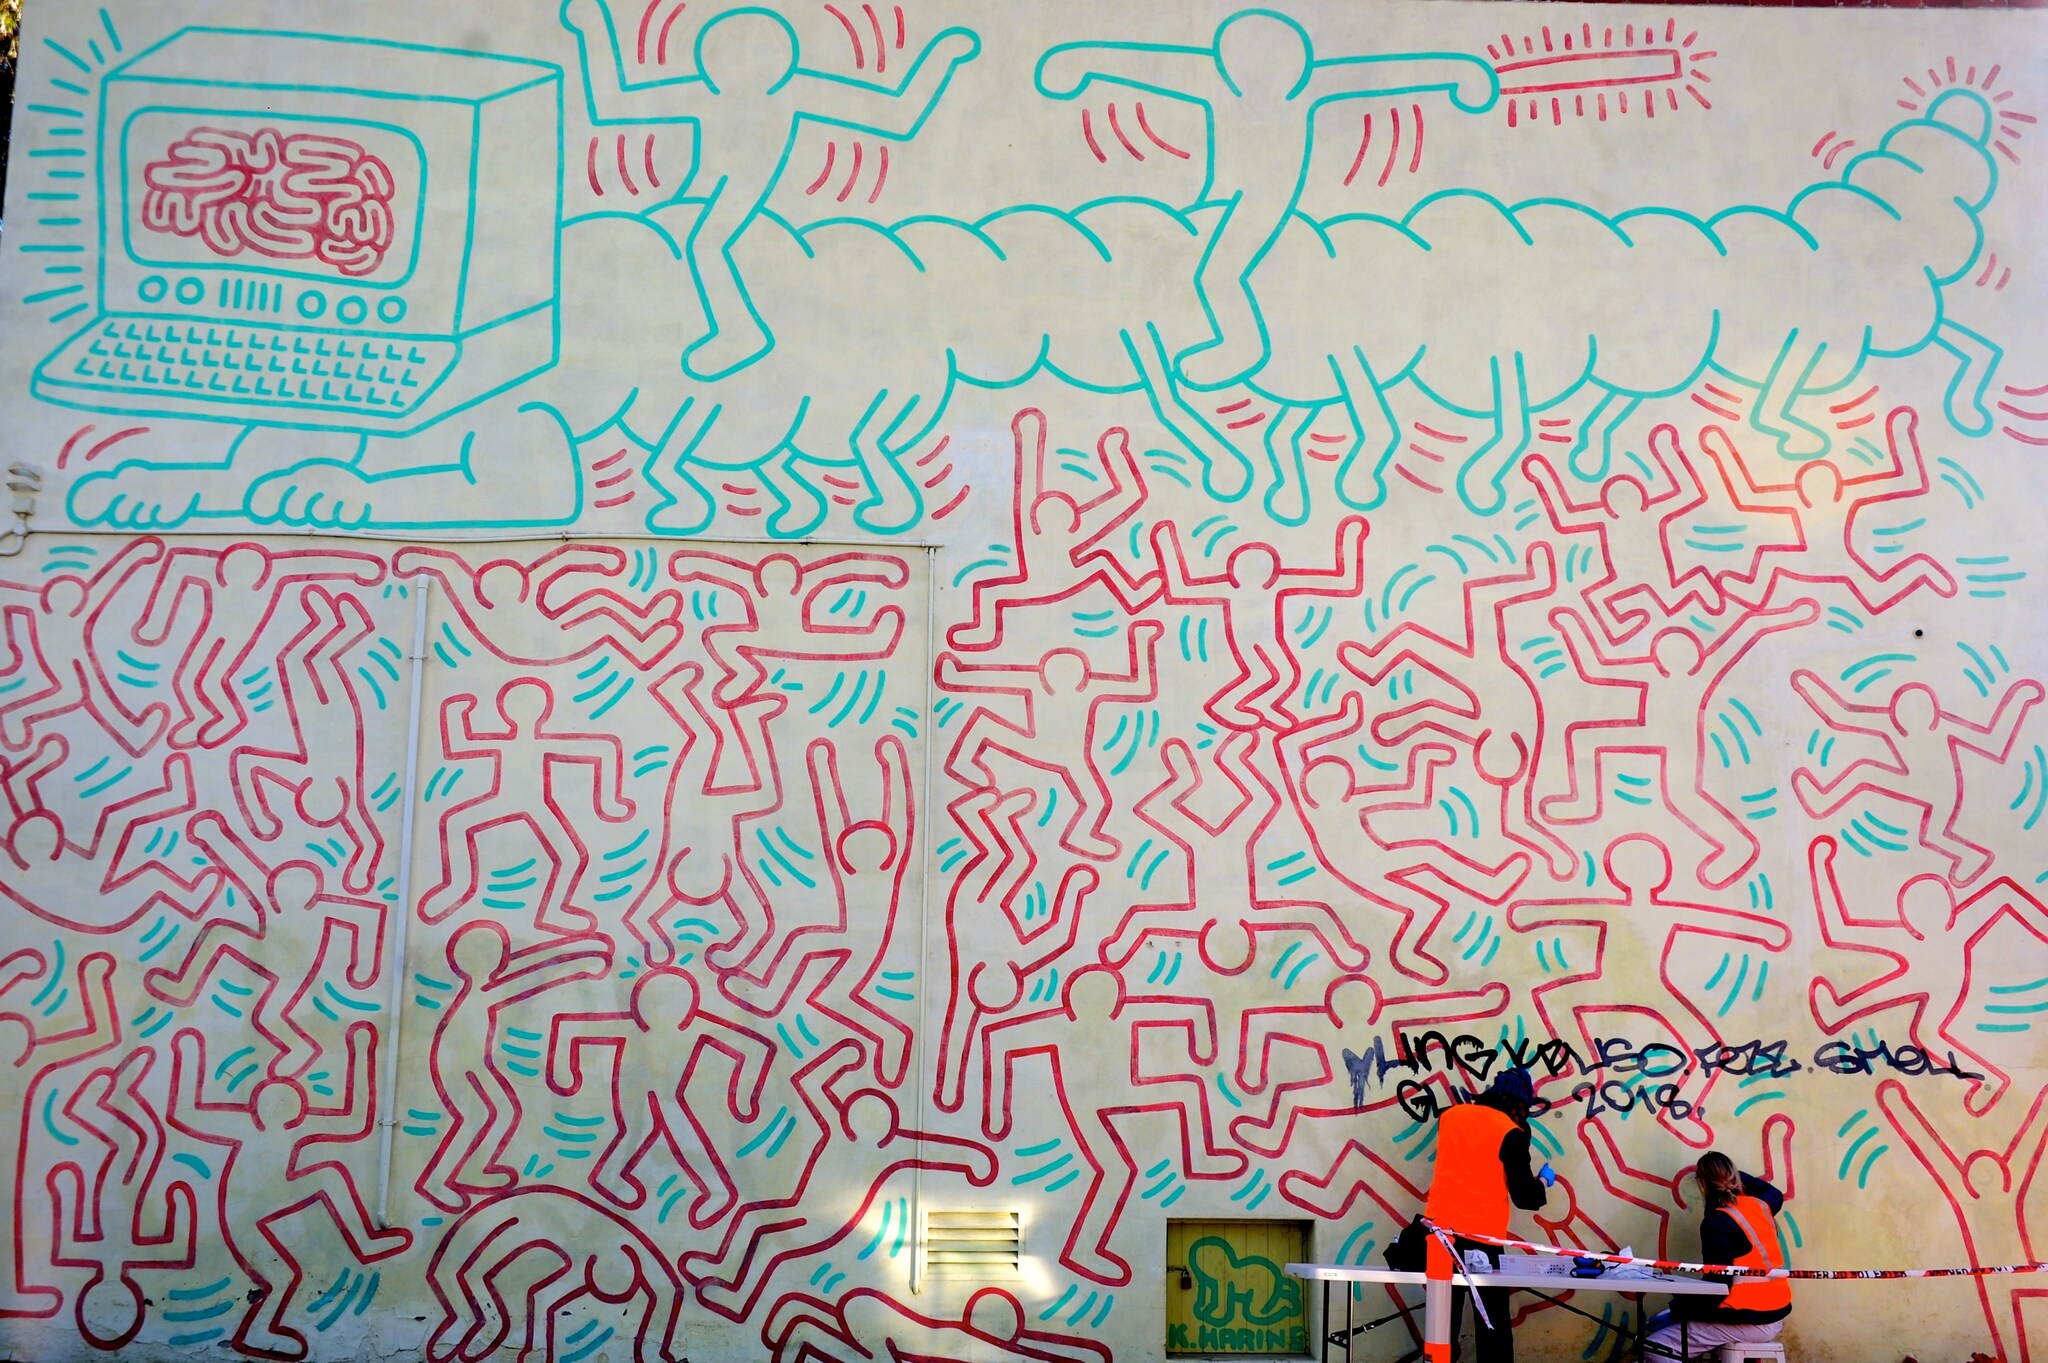 Keith Haring Mural: Located at Johnston Street in Collingwood and painted in 1984 by New York-based artist Keith Haring (1958-1990), this is the oldest and most significant street art mural in Melbourne. It was restored in 2013 and is now listed in the Victoria Heritage Register. In 1984, Haring was commissioned by the National Gallery of Victoria and the Australian Centre for Contemporary Art to create a mural in Melbourne which temporarily replaced the water curtain at the National Gallery. In the photograph, art conservationists can be seen restoring the mural after it was defiled again recently. 